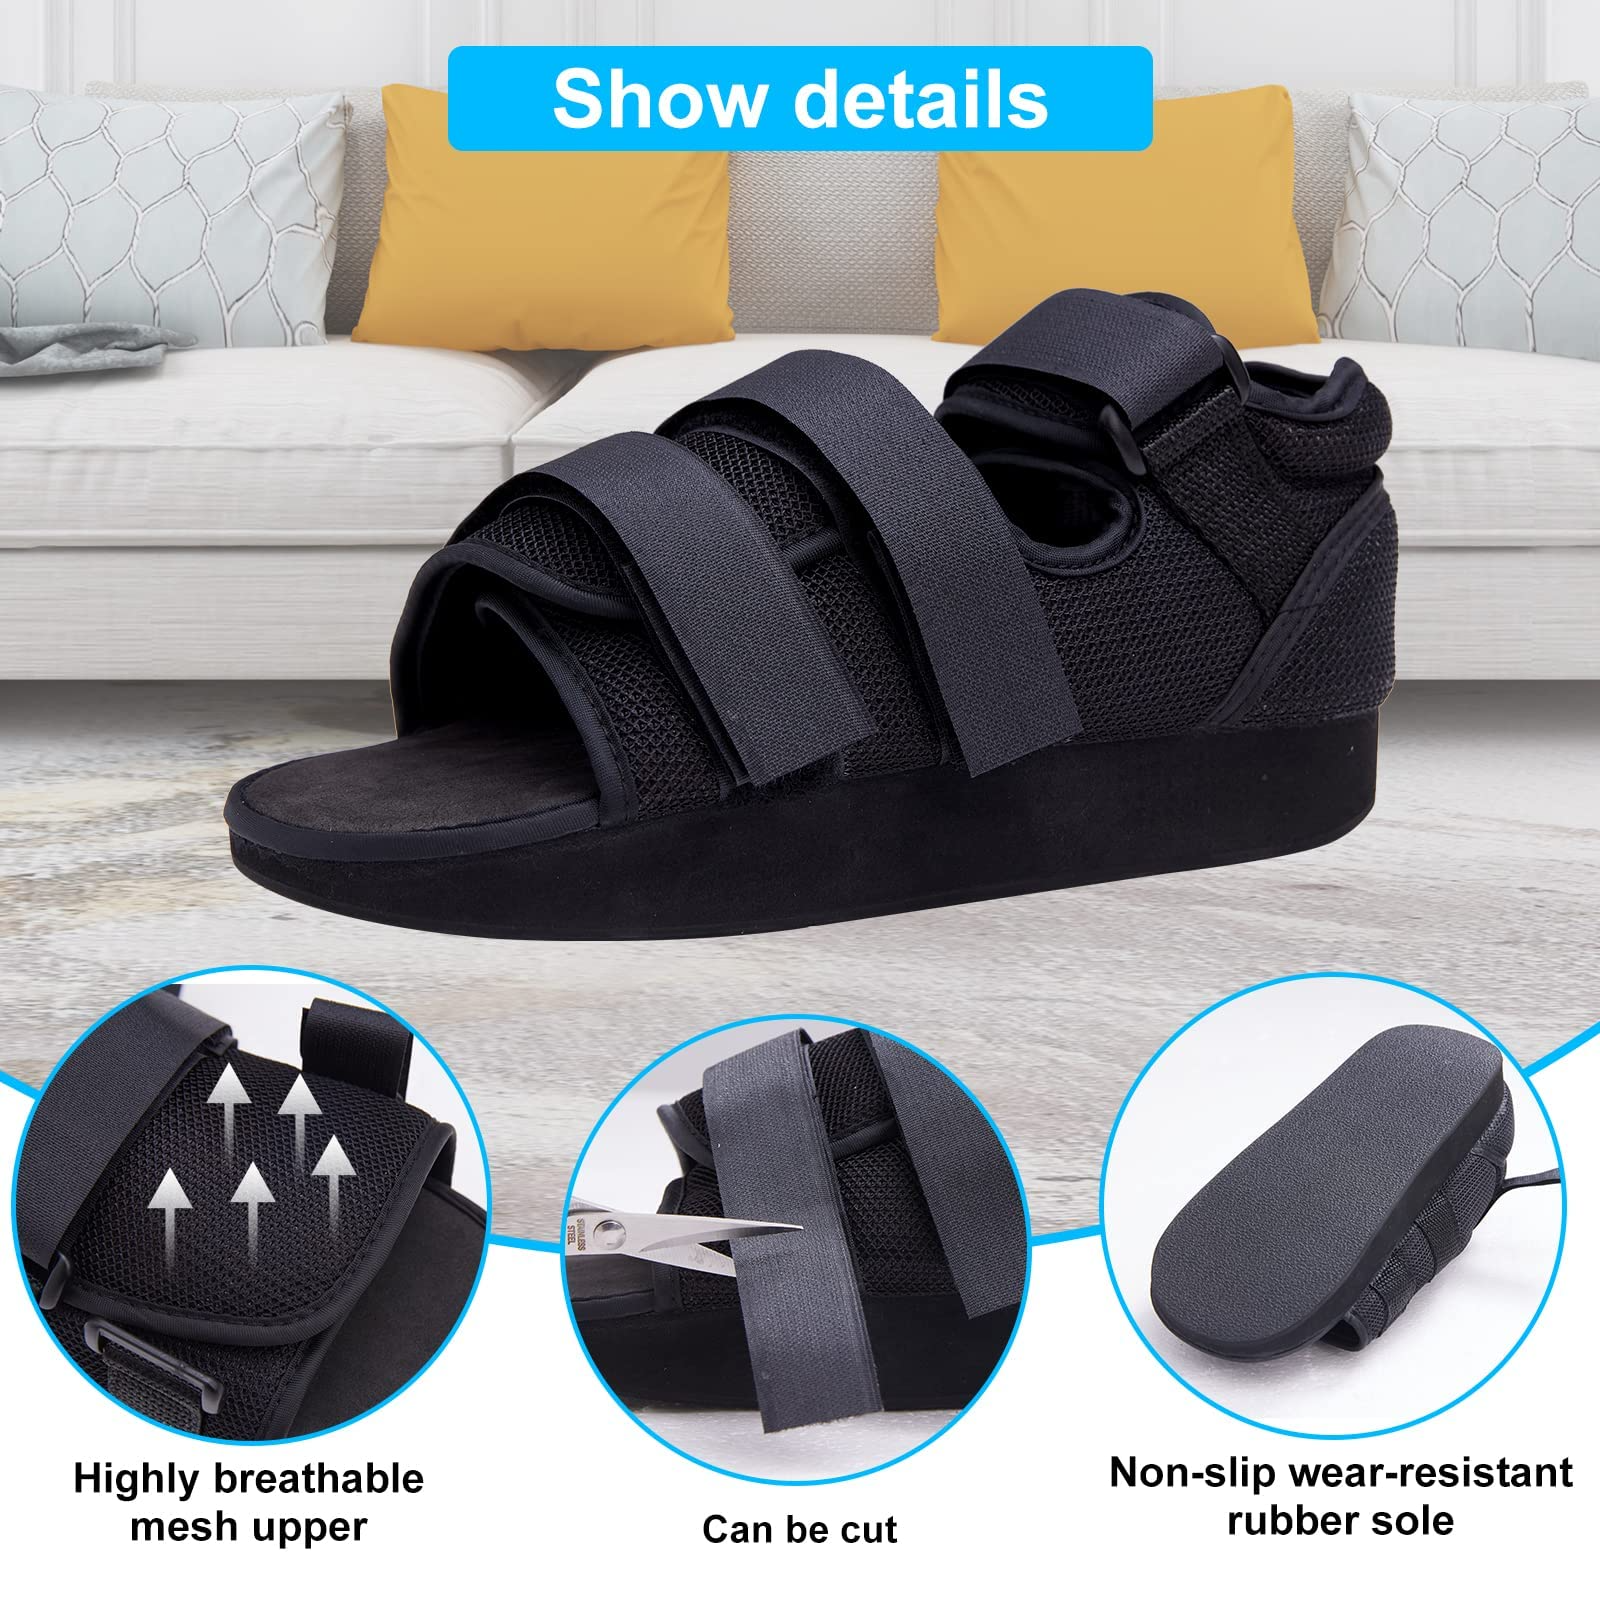 Post Op Shoe - Lightweight Medical Walking Shoes with Adjustable Strap - Orthopedic Recovery Cast Shoe for Post Surgery, Fractured Foot, Injured Toes, Stress Fracture, Sprains - Left or Right Foot - image 5 of 7